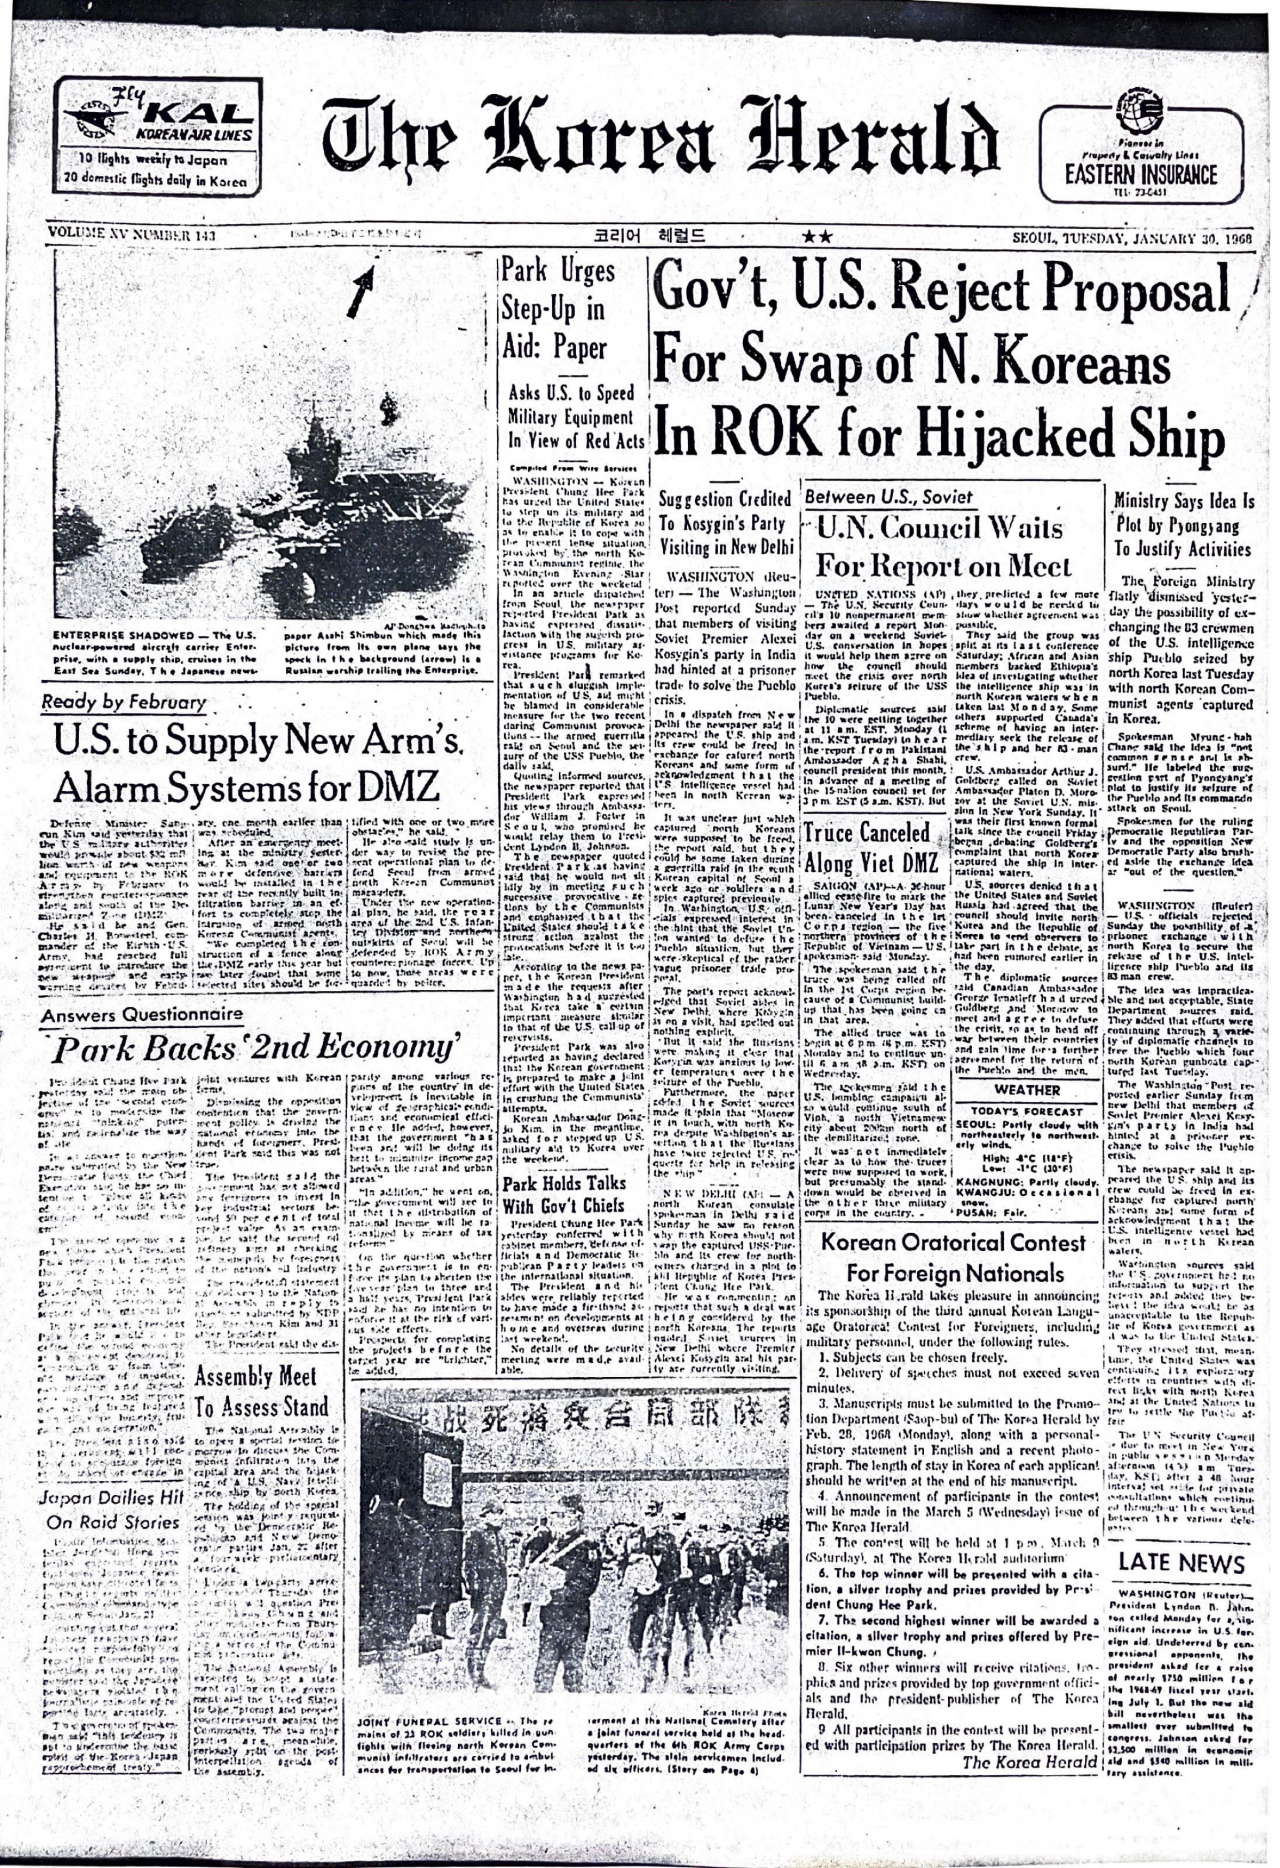 The top story for this Jan. 30, 1968 issue of The Korea Herald says that South Korea and the US governments refused Pyongyang's proposal, which was to exchange the USS Pueblo and its crew for the North Korean agents who had been captured in the South. (The Korea Herald)